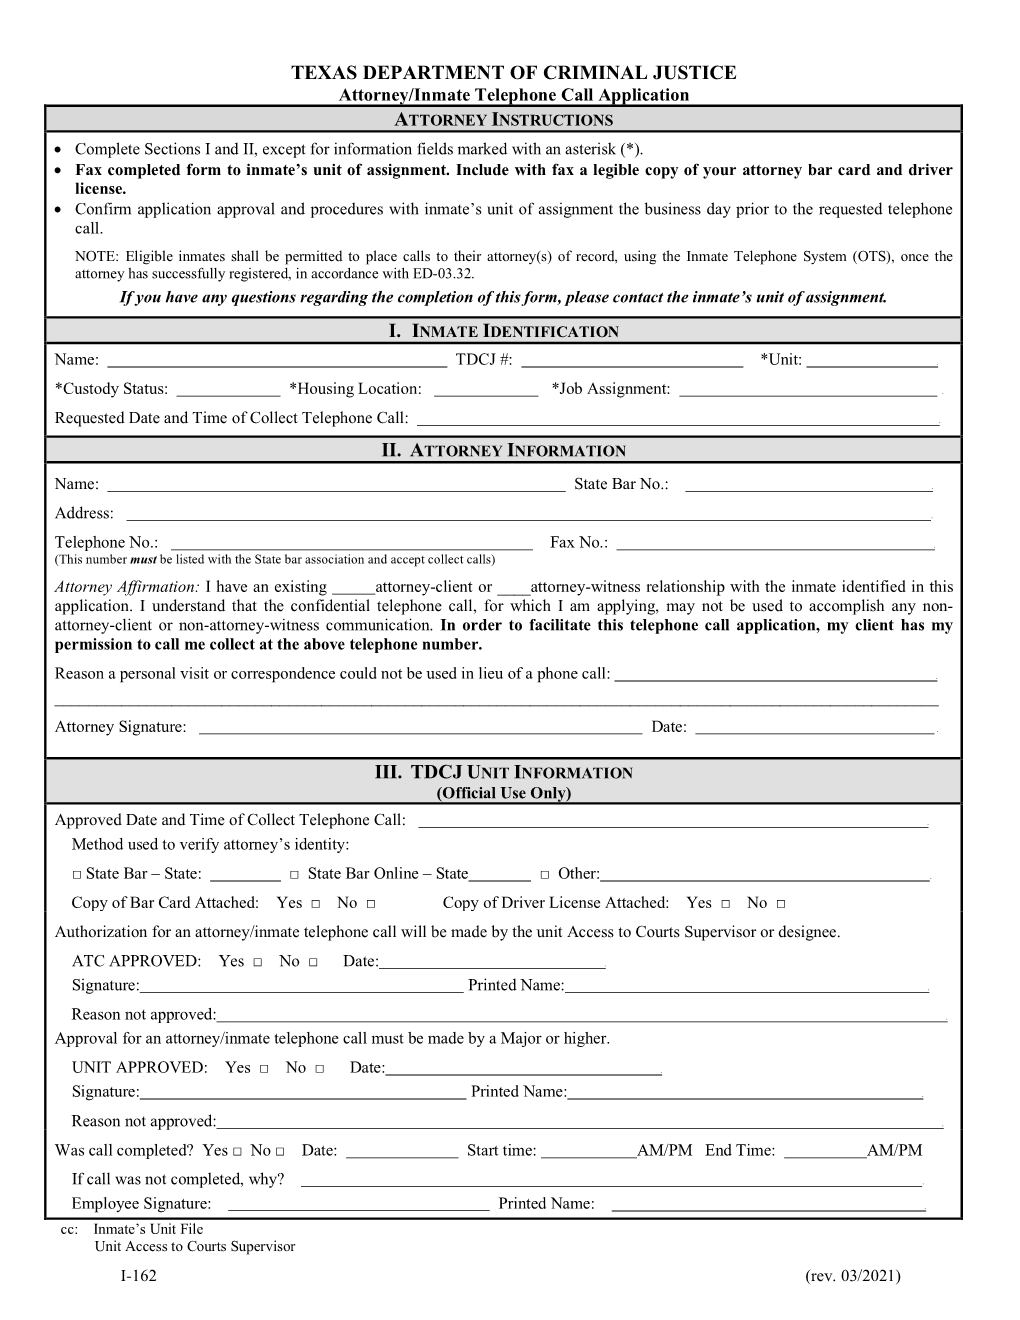 I-162 Form Attorney/Inmate Telephone Call Application